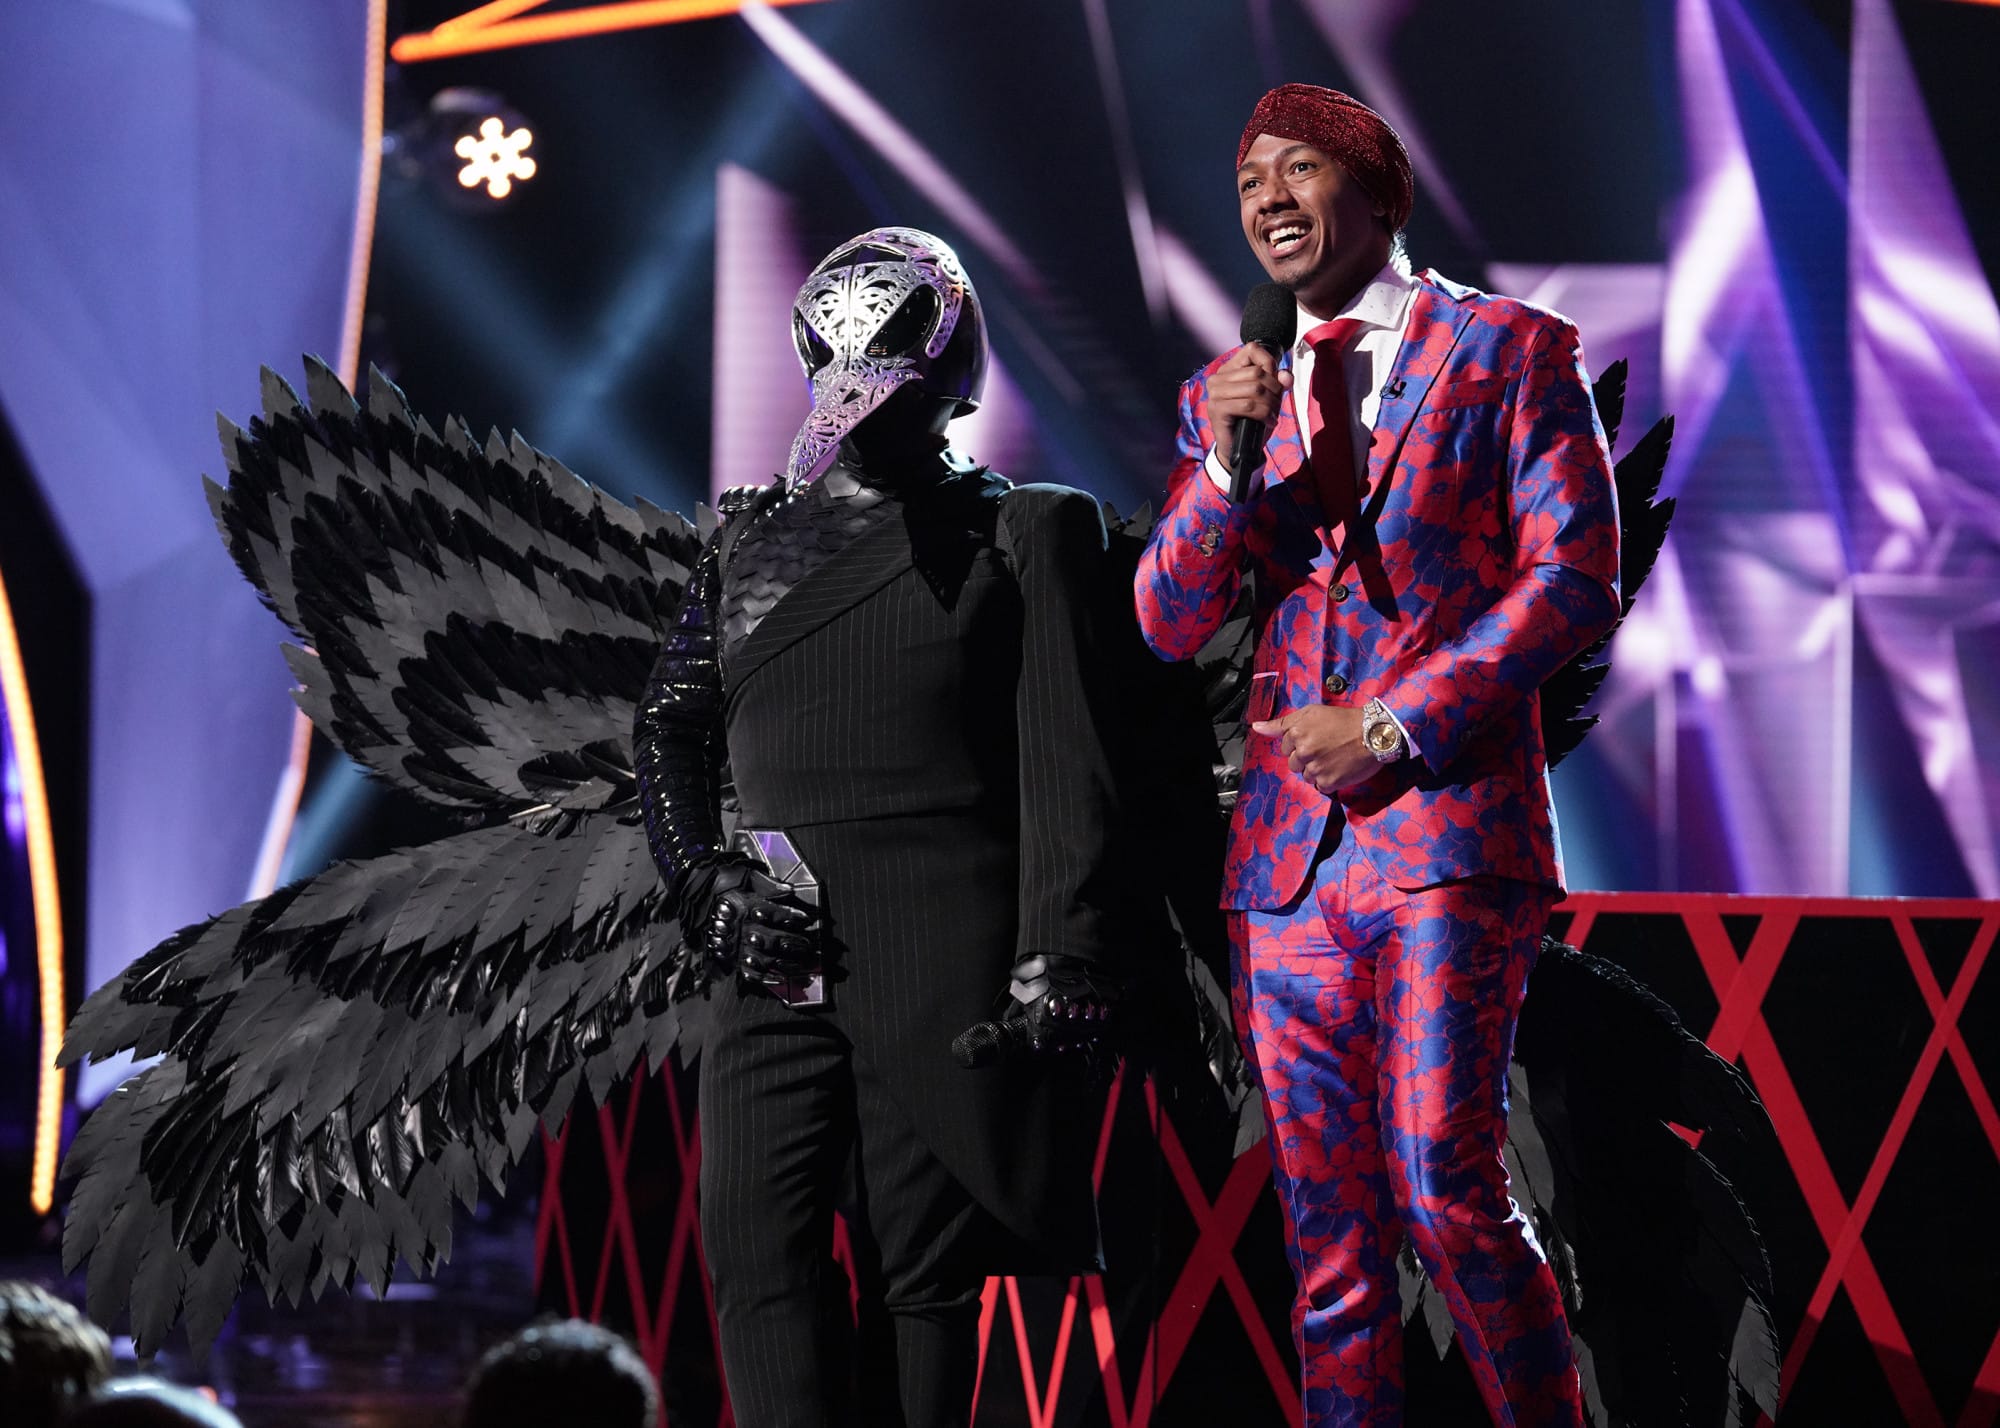 THE MASKED SINGER: L-R: Raven and host Nick Cannon in the “Another Mask Bites the Dust” airing Wednesday, Jan. 23 (9:00-10:00 PM ET/PT) on FOX. © 2019 FOX Broadcasting.  Cr: Michael Becker / FOX.